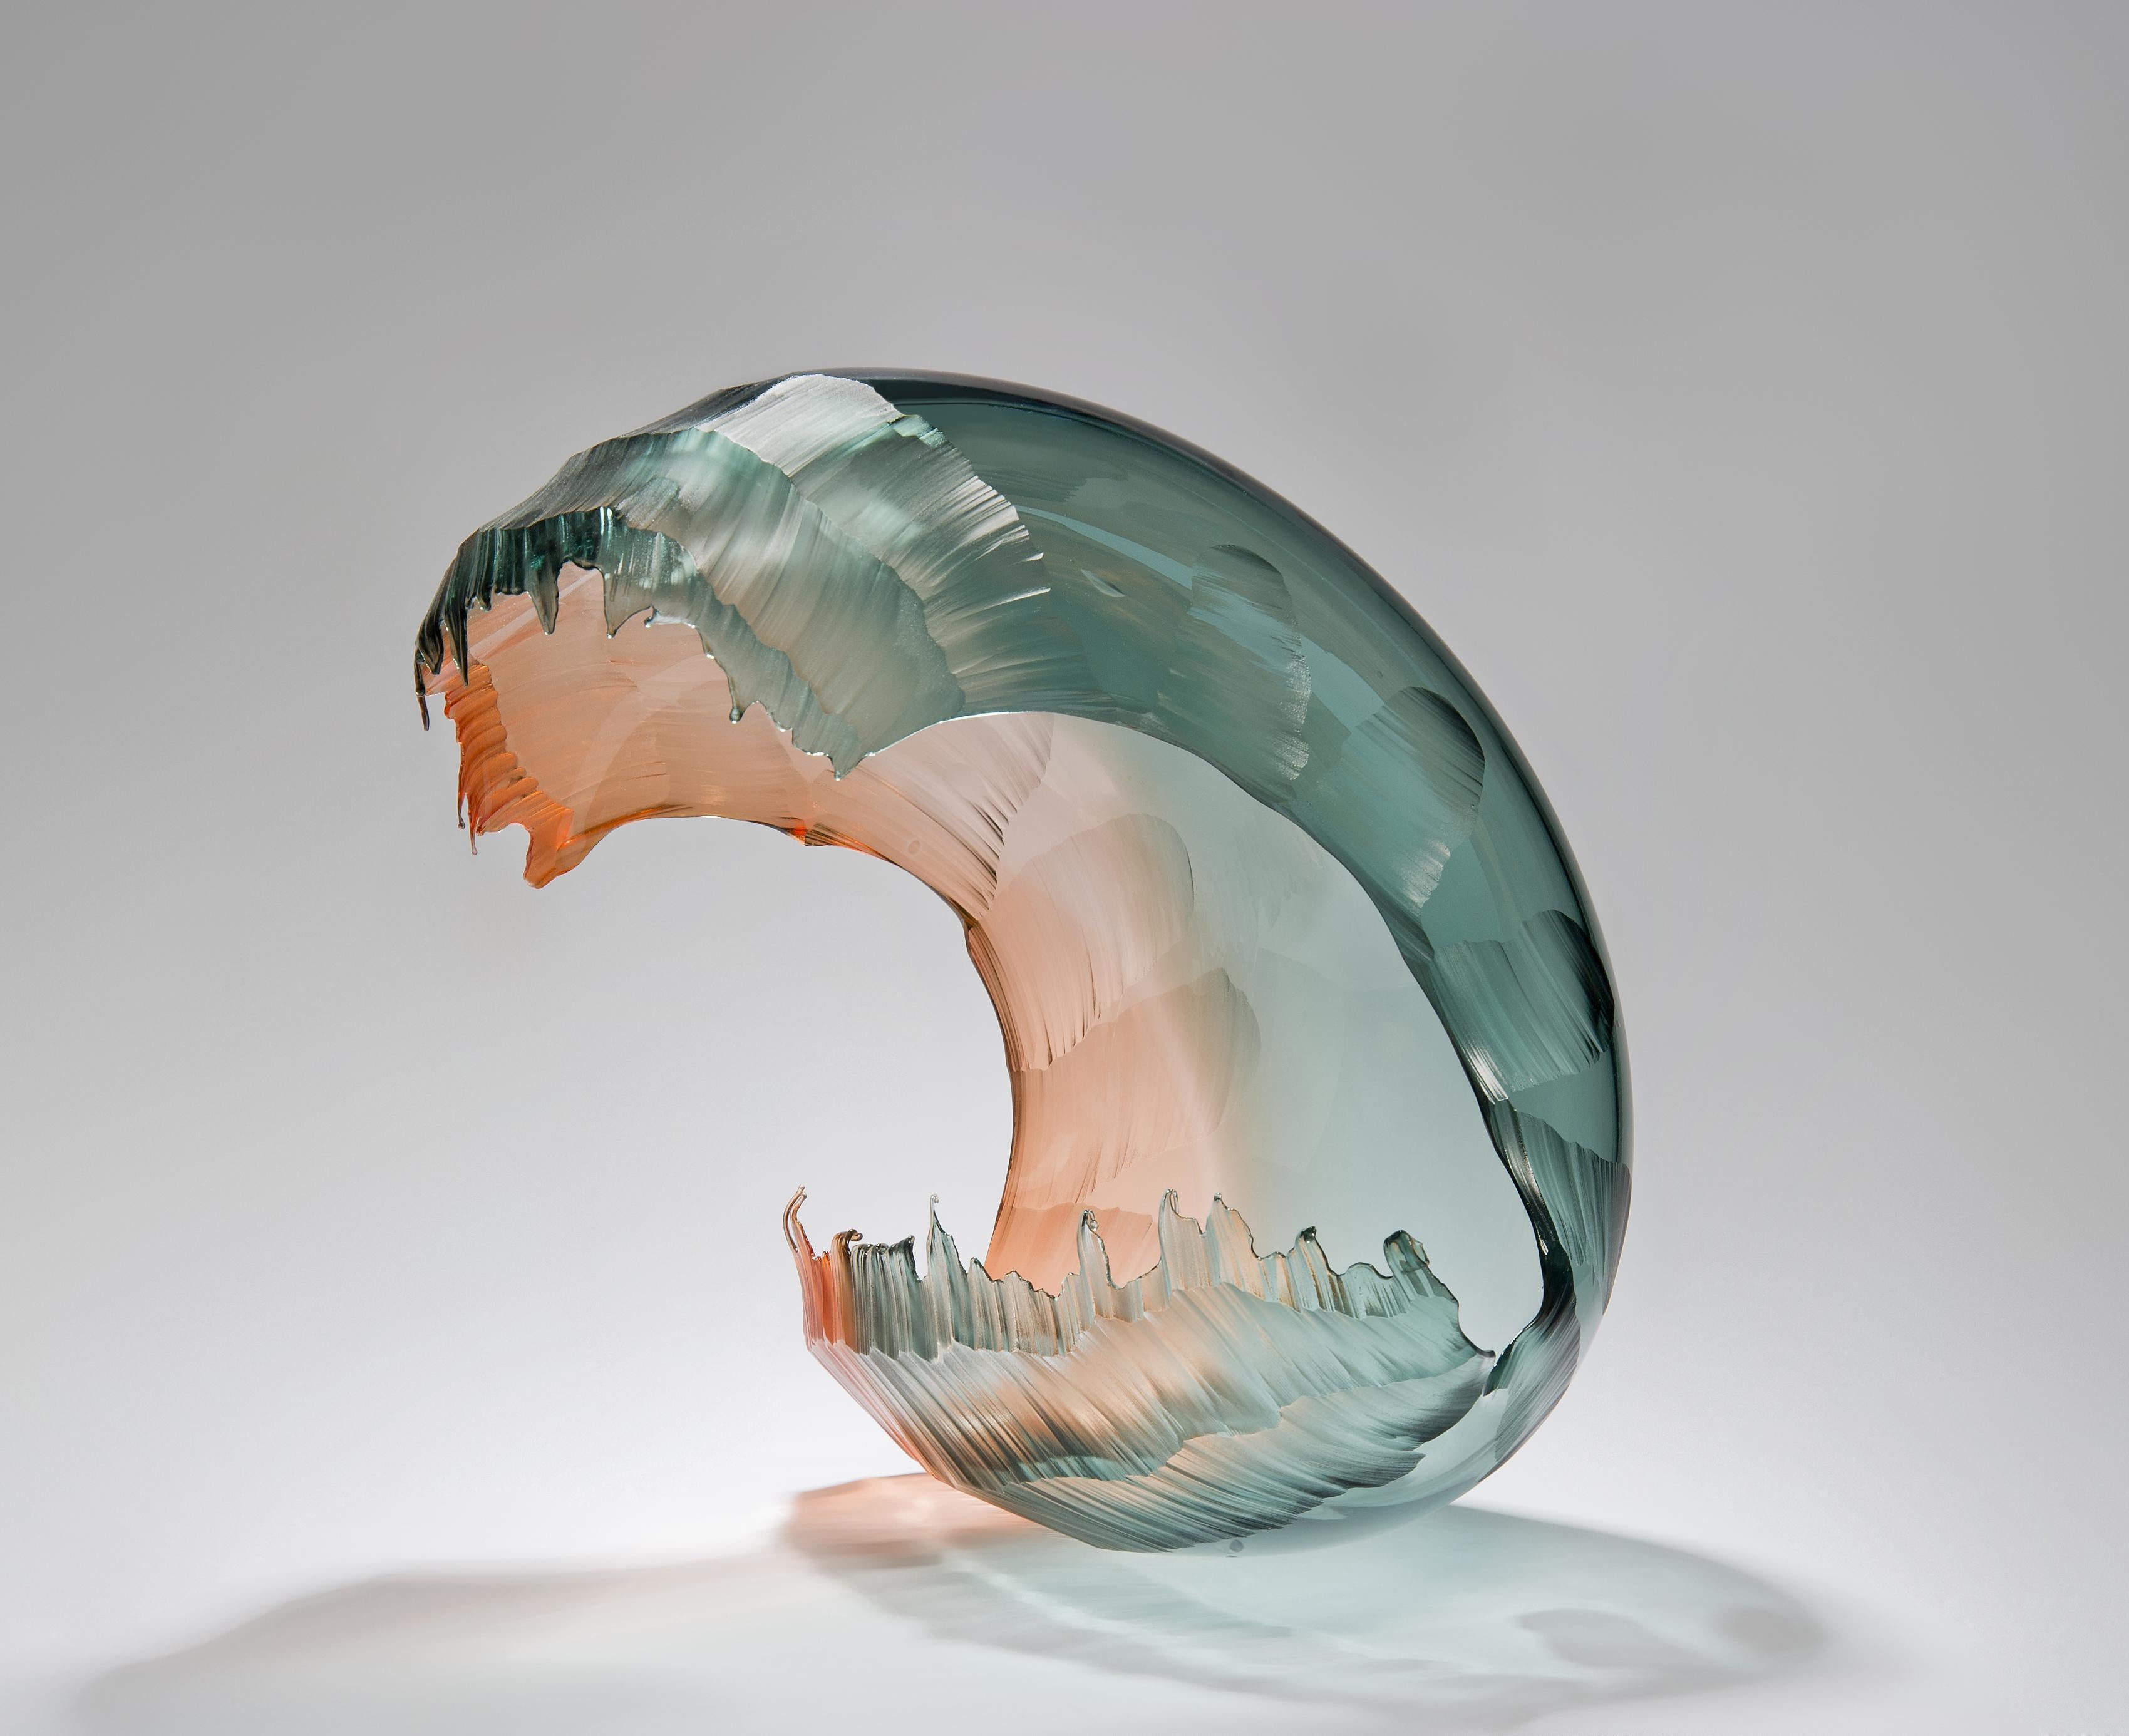 Organic Modern North Sea Morning Wave Form, a Teal & Apricot Glass Sculpture by Graham Muir